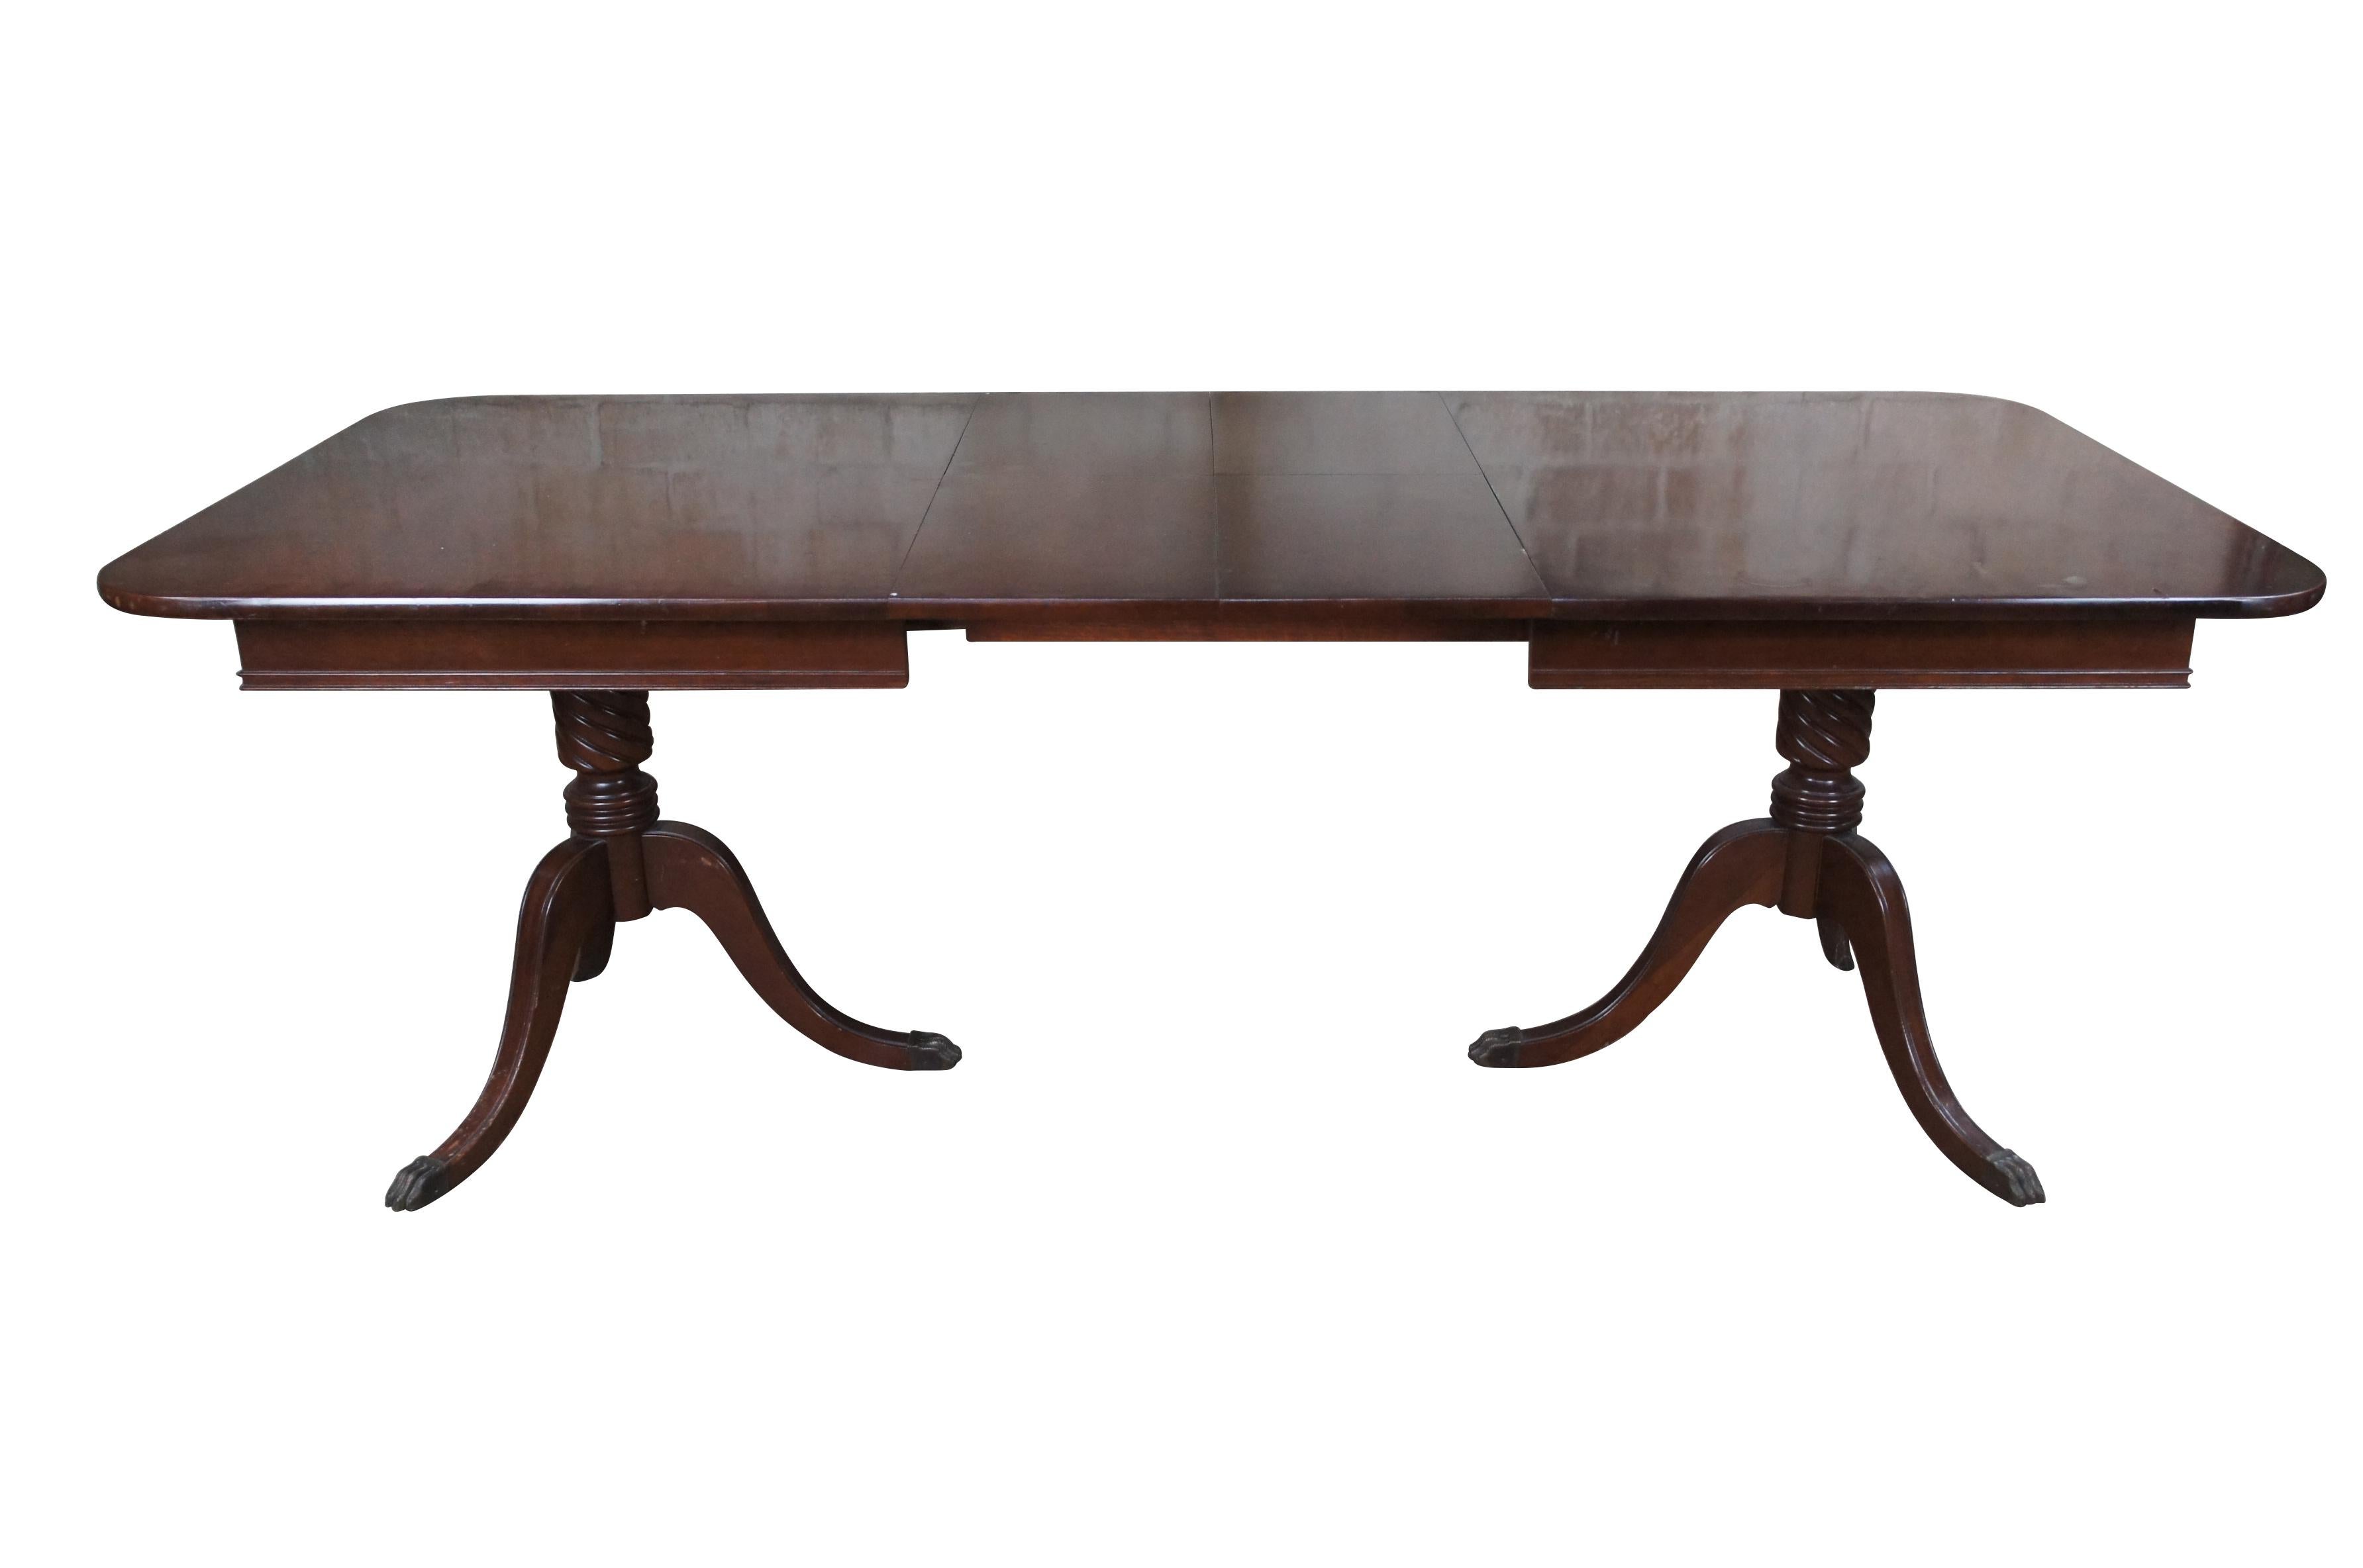 Mid century, circa 1940s, Duncan Phyfe dining table. Made of mahogany featuring rectangular form with built in extendable leaves and two tripod bases that feature barley twisted supports and claw feet.

DIMENSIONS

40